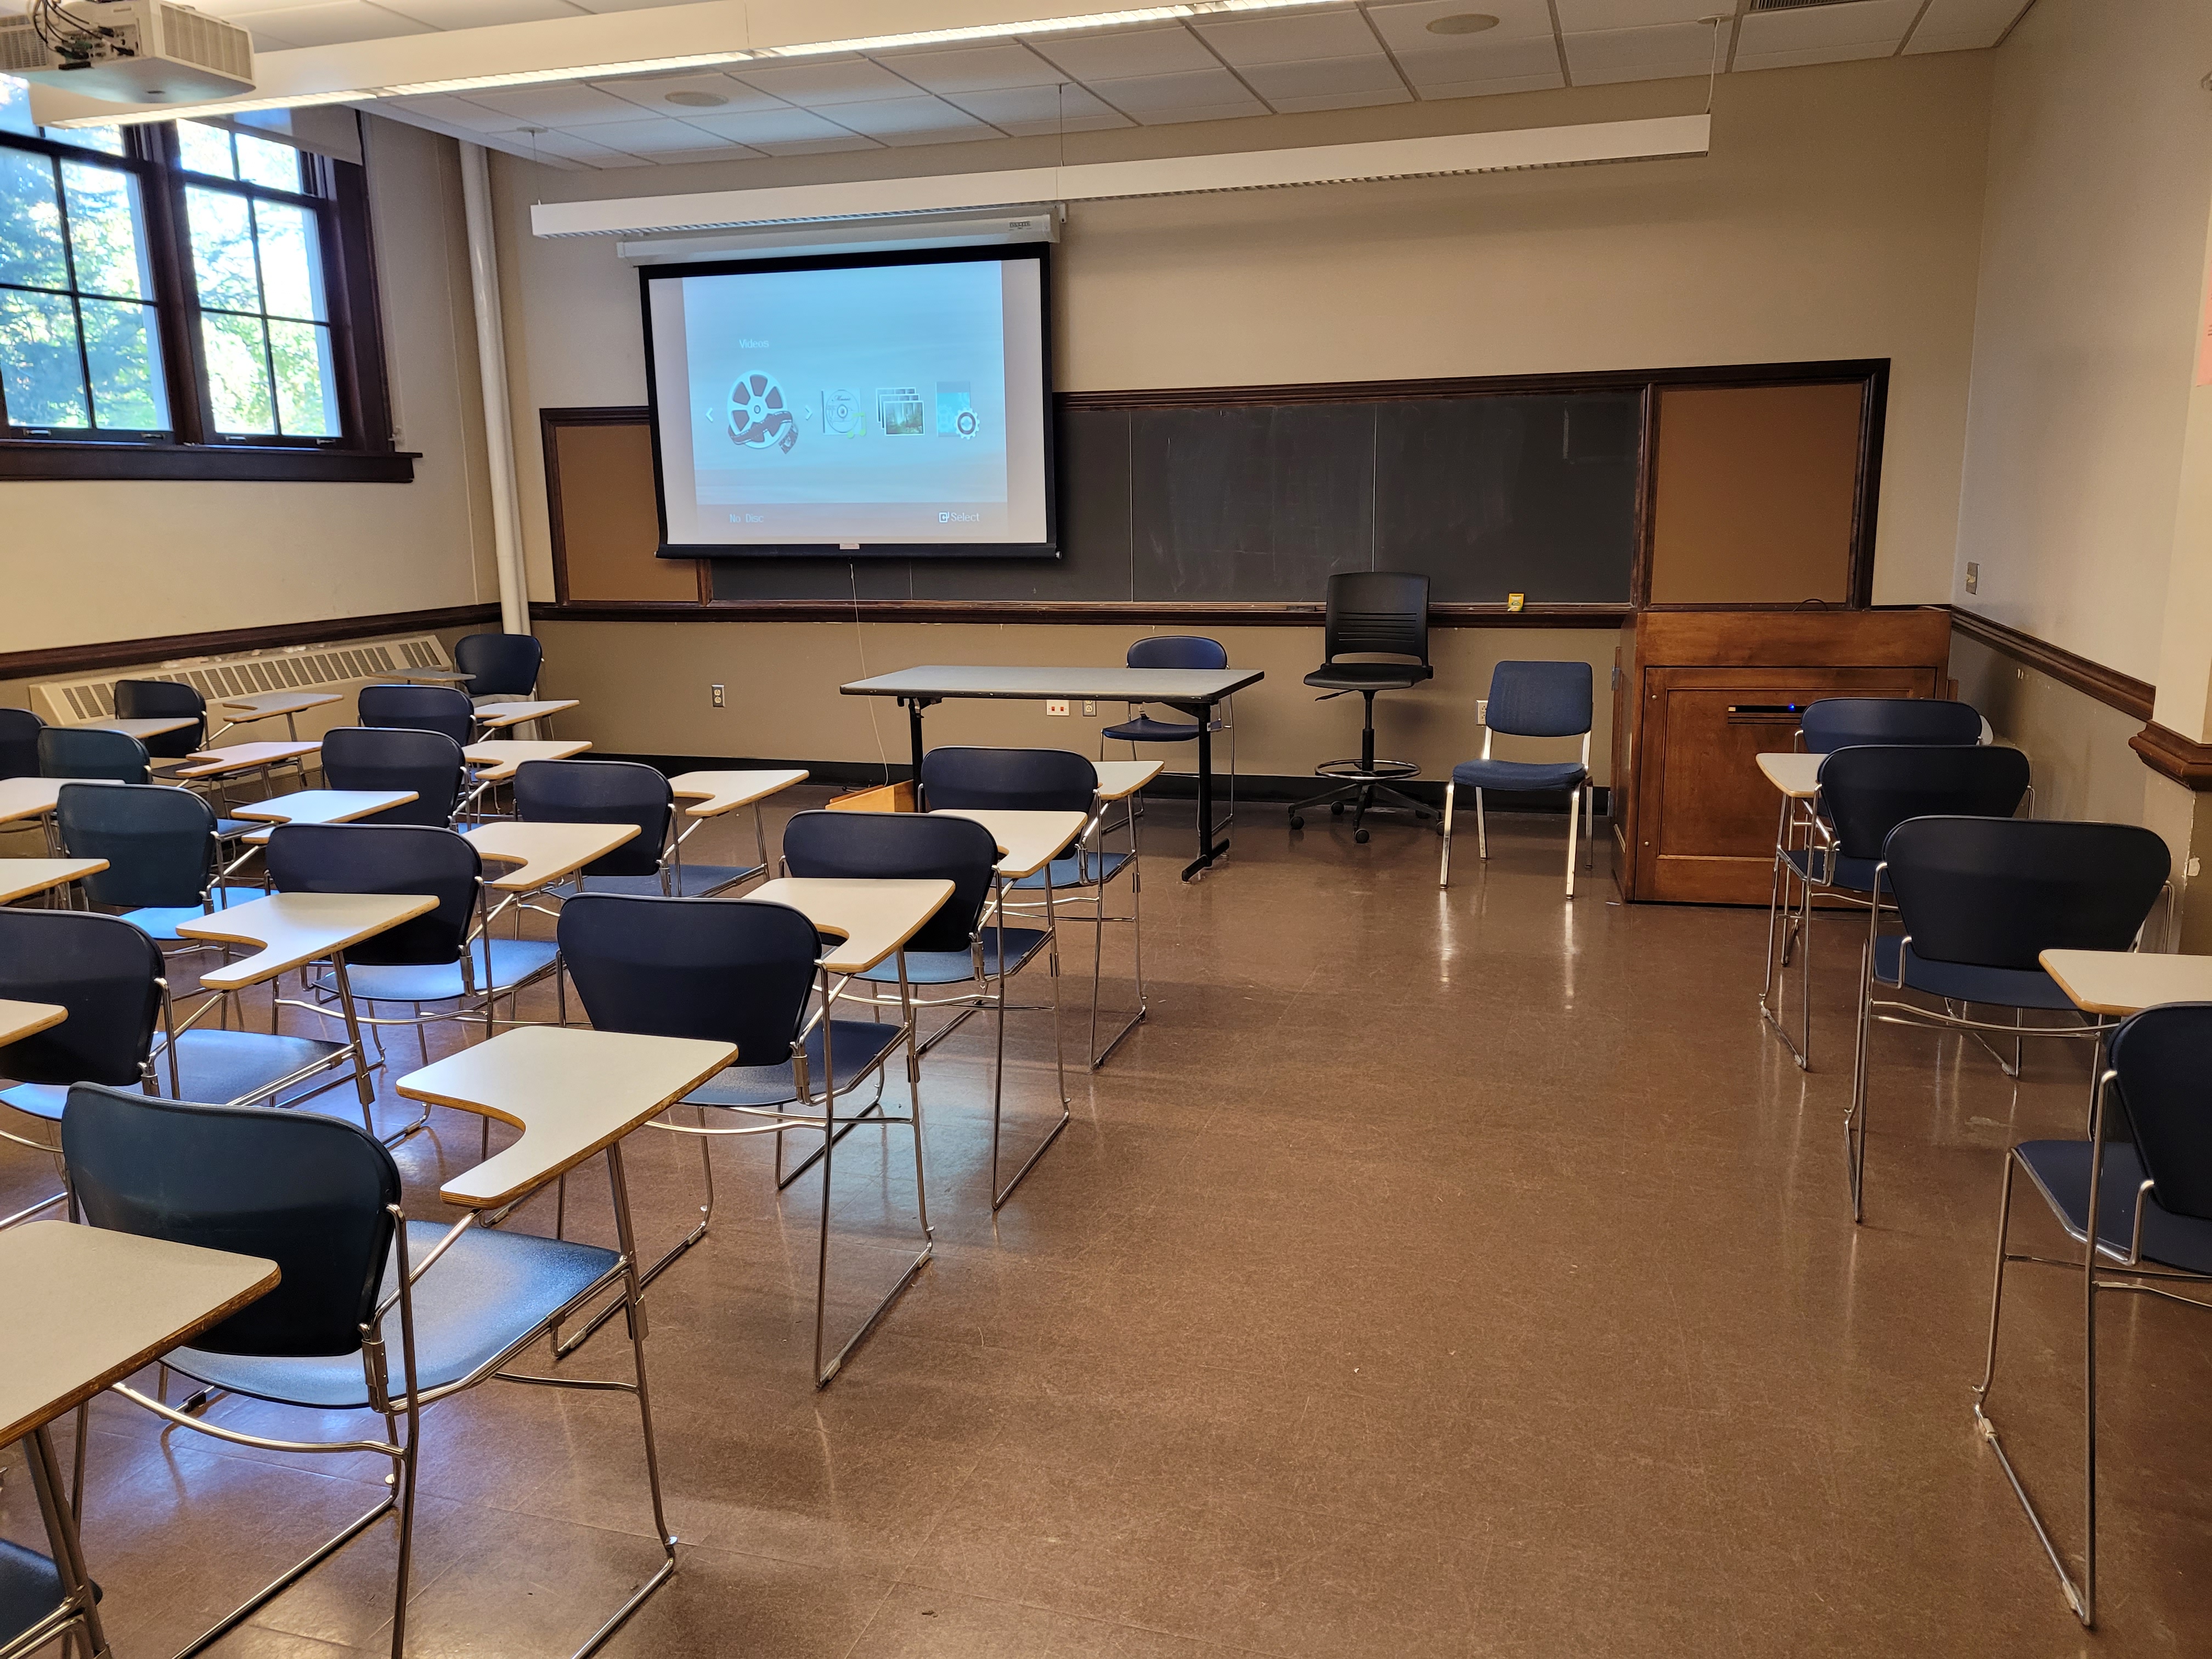 A view of the classroom with movable tableted arm chairs, chalk board, and instructor table in front.